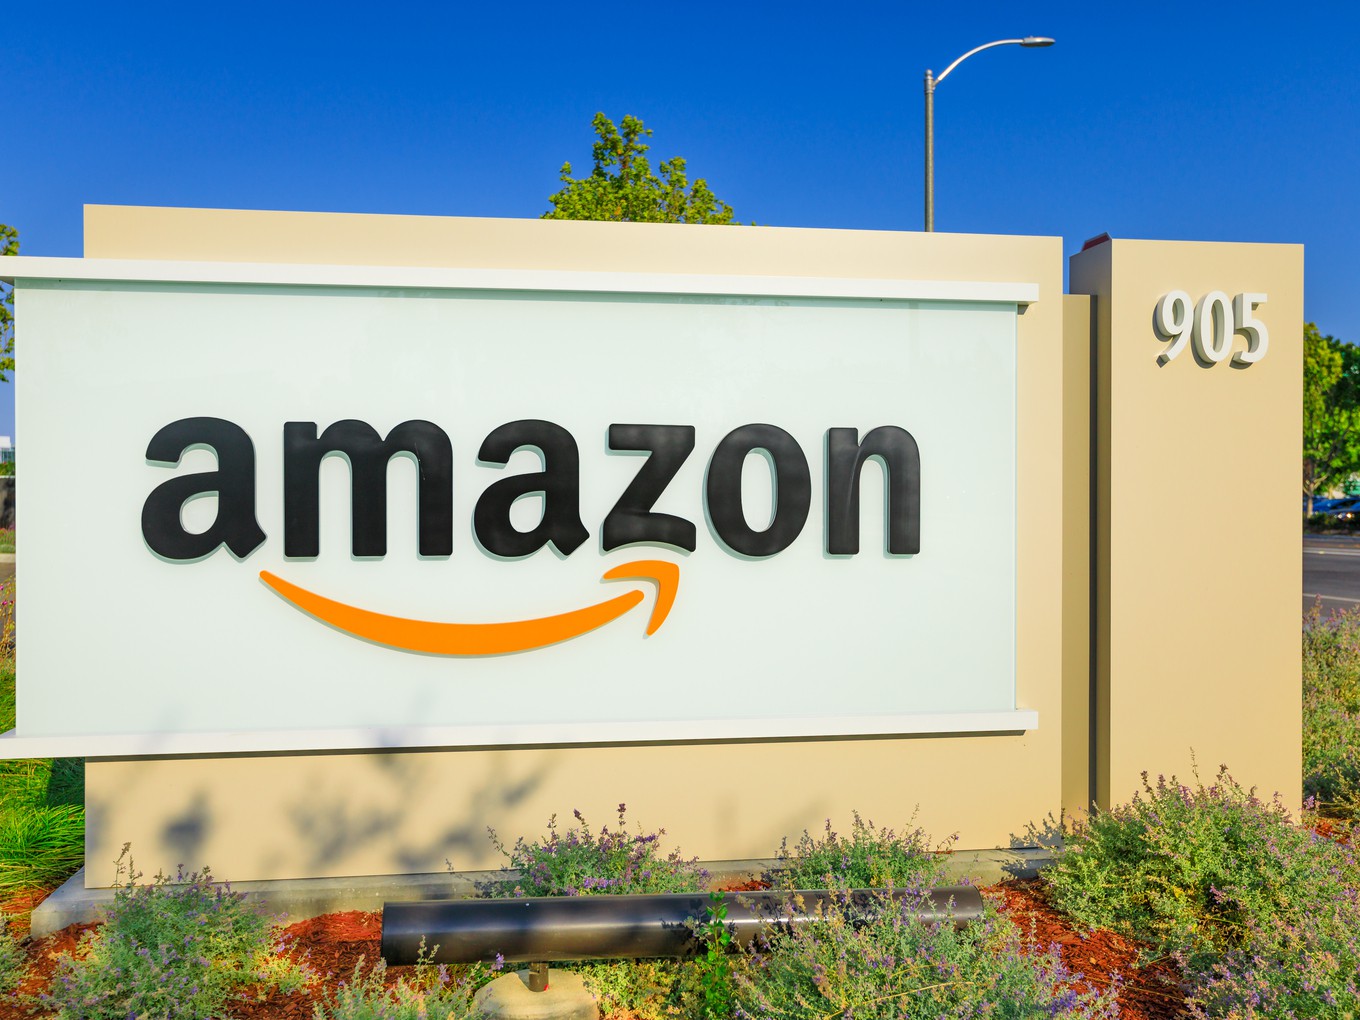 Amazon India To Account For 4% of Company’s Overall Sales By 2023